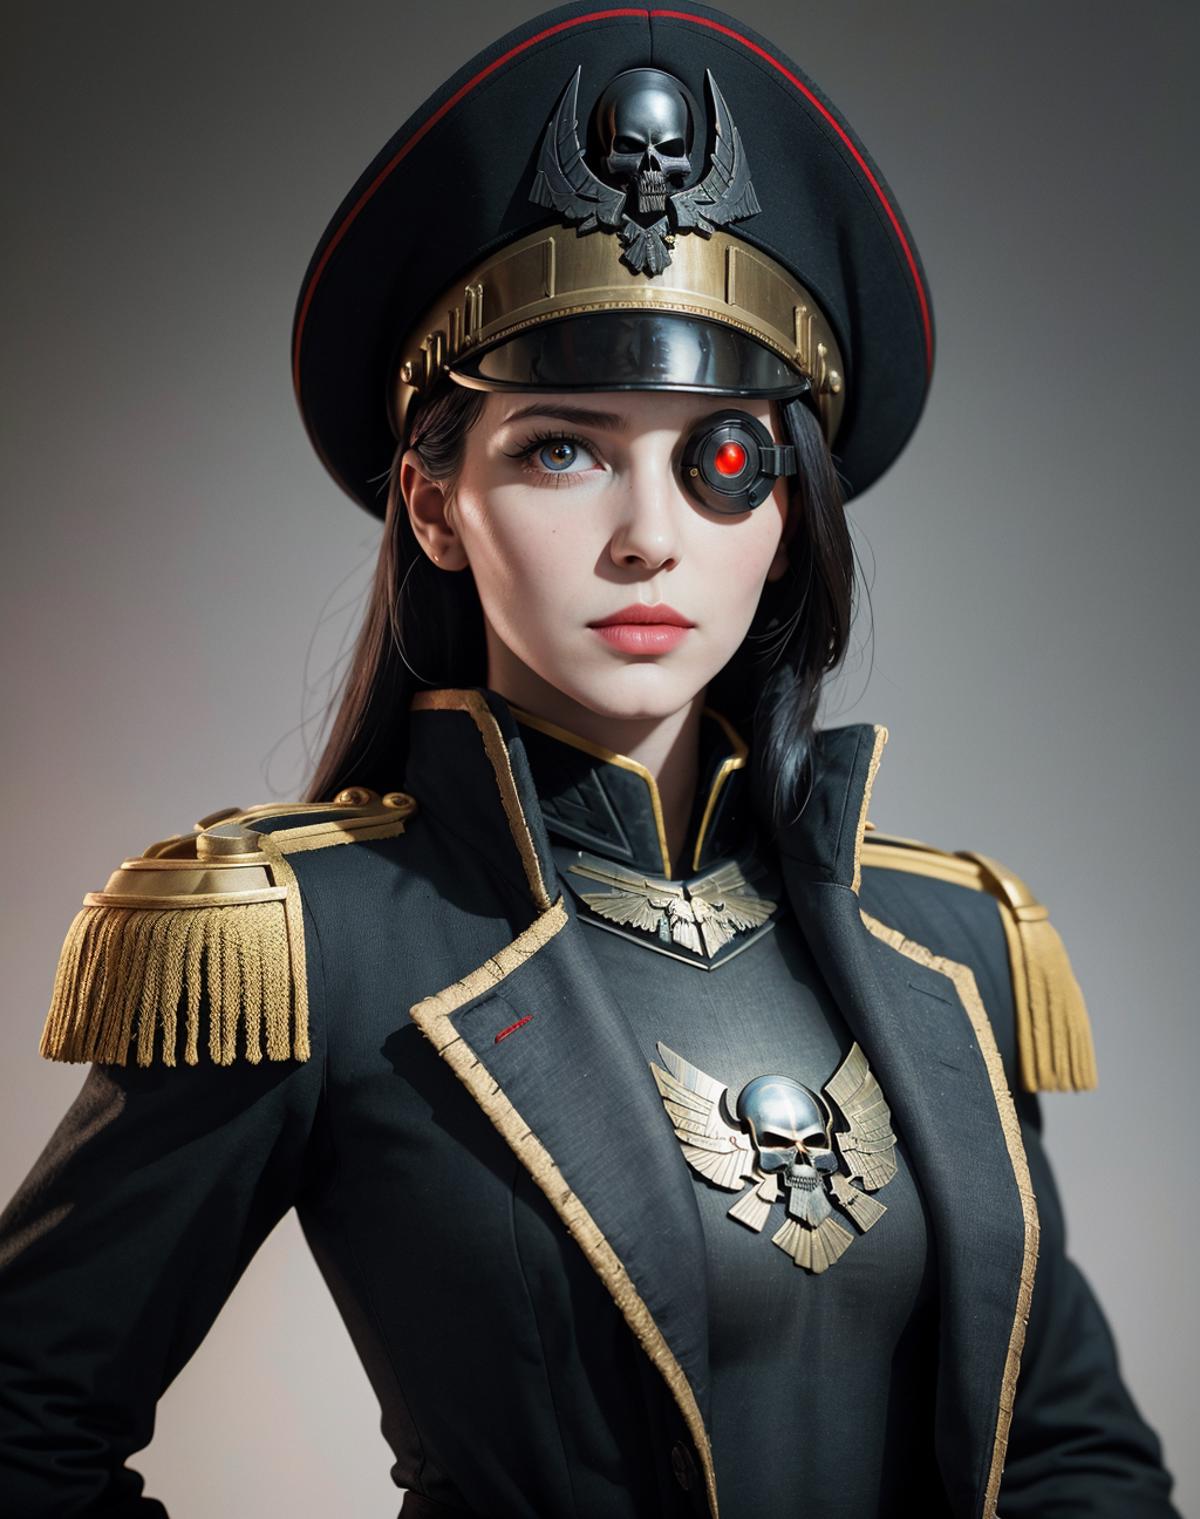 Warhammer 40K Commissar Outfit - by EDG image by EDG